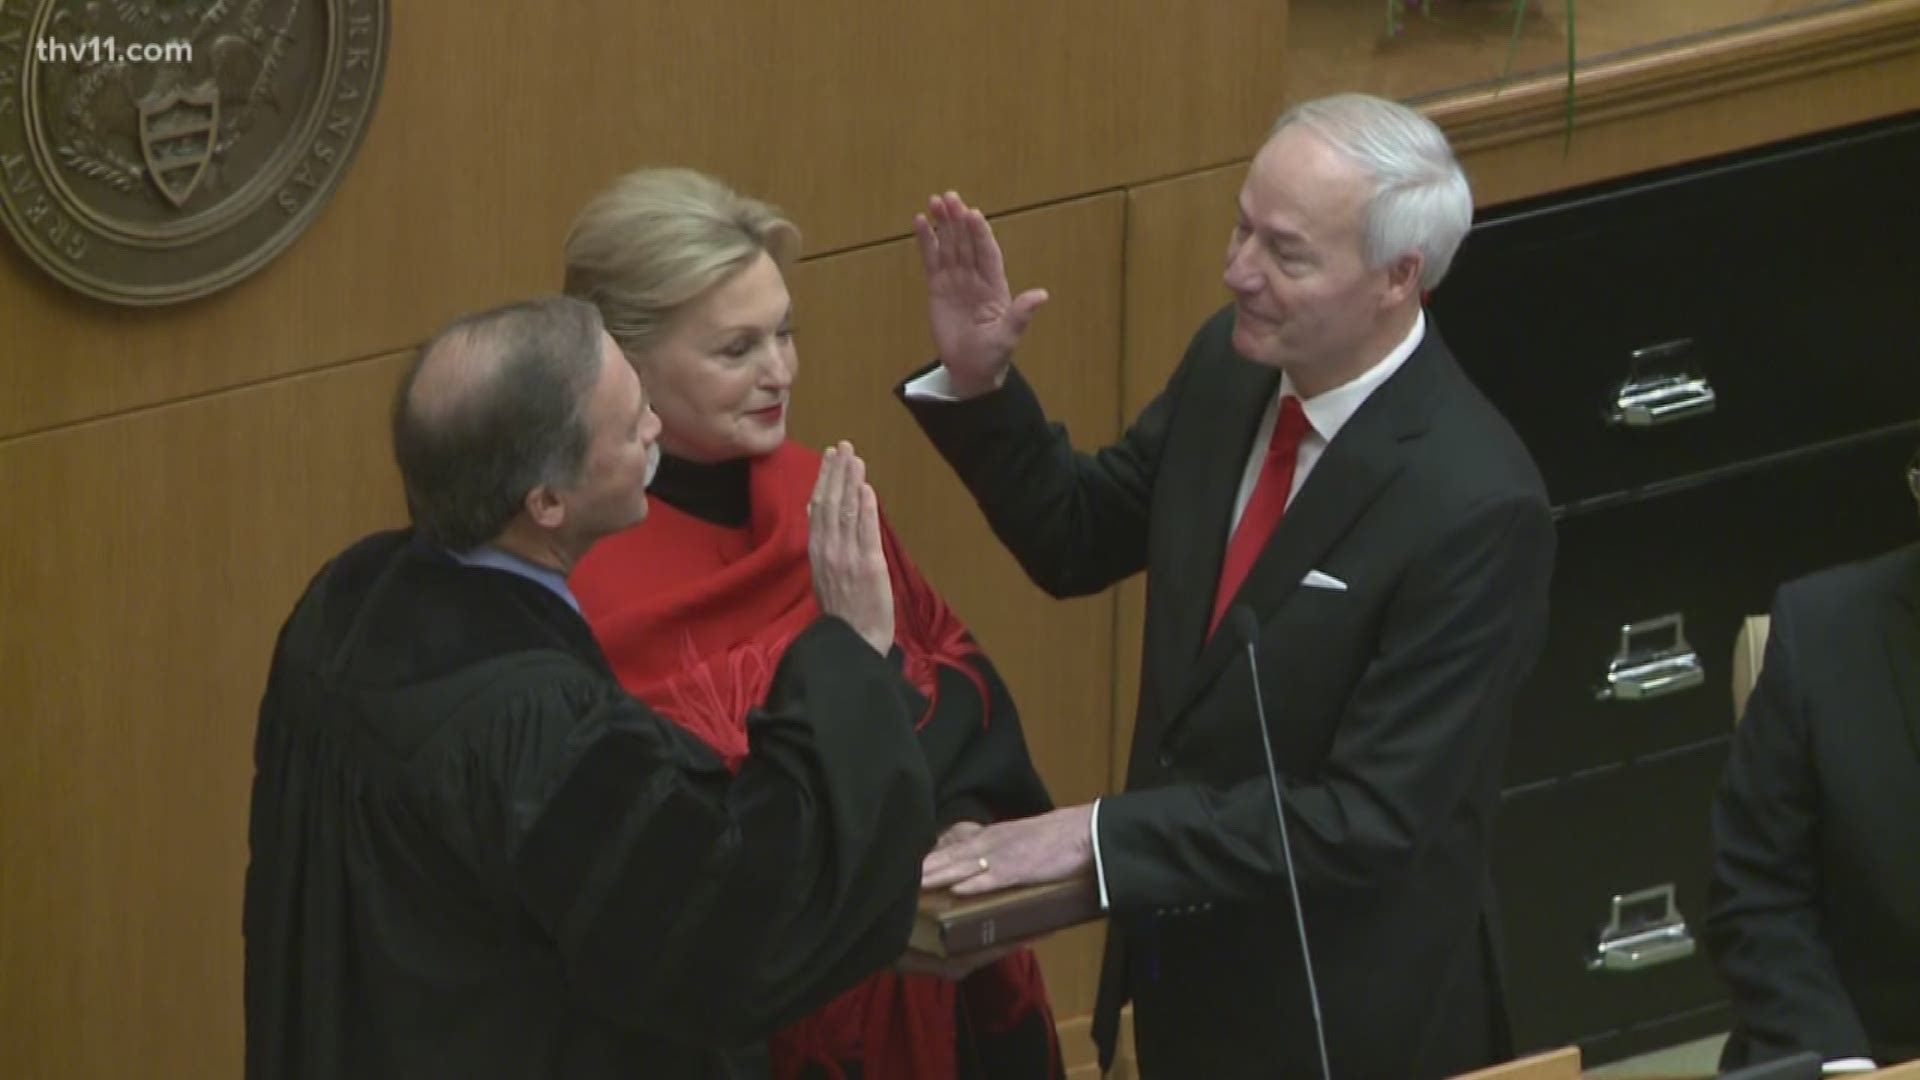 Governor Asa Hutchinson has officially begun his second term as the governor of Arkansas. He took the oath of office and gave his inaugural address at the State Capitol today.